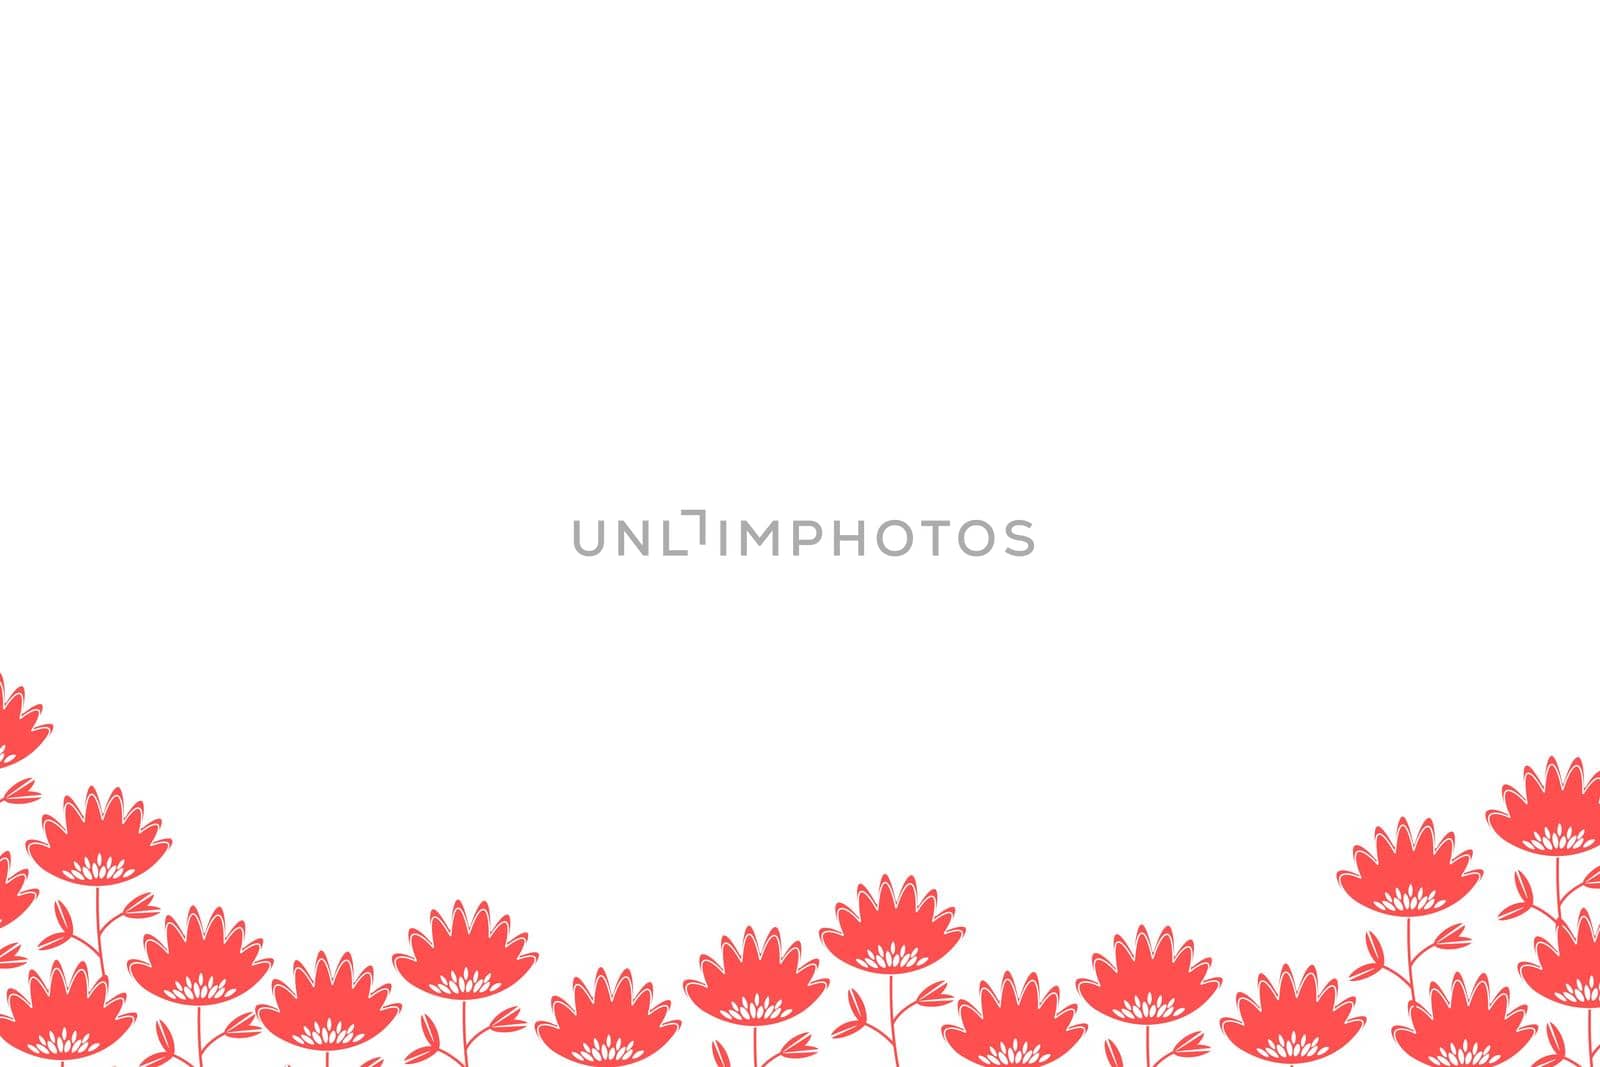 Floral frame based on traditional folk art ornaments on white background. Ornate border with pink flowers. Vector stock illustration for wallpaper, posters, card. Scandinavian style. Copy space